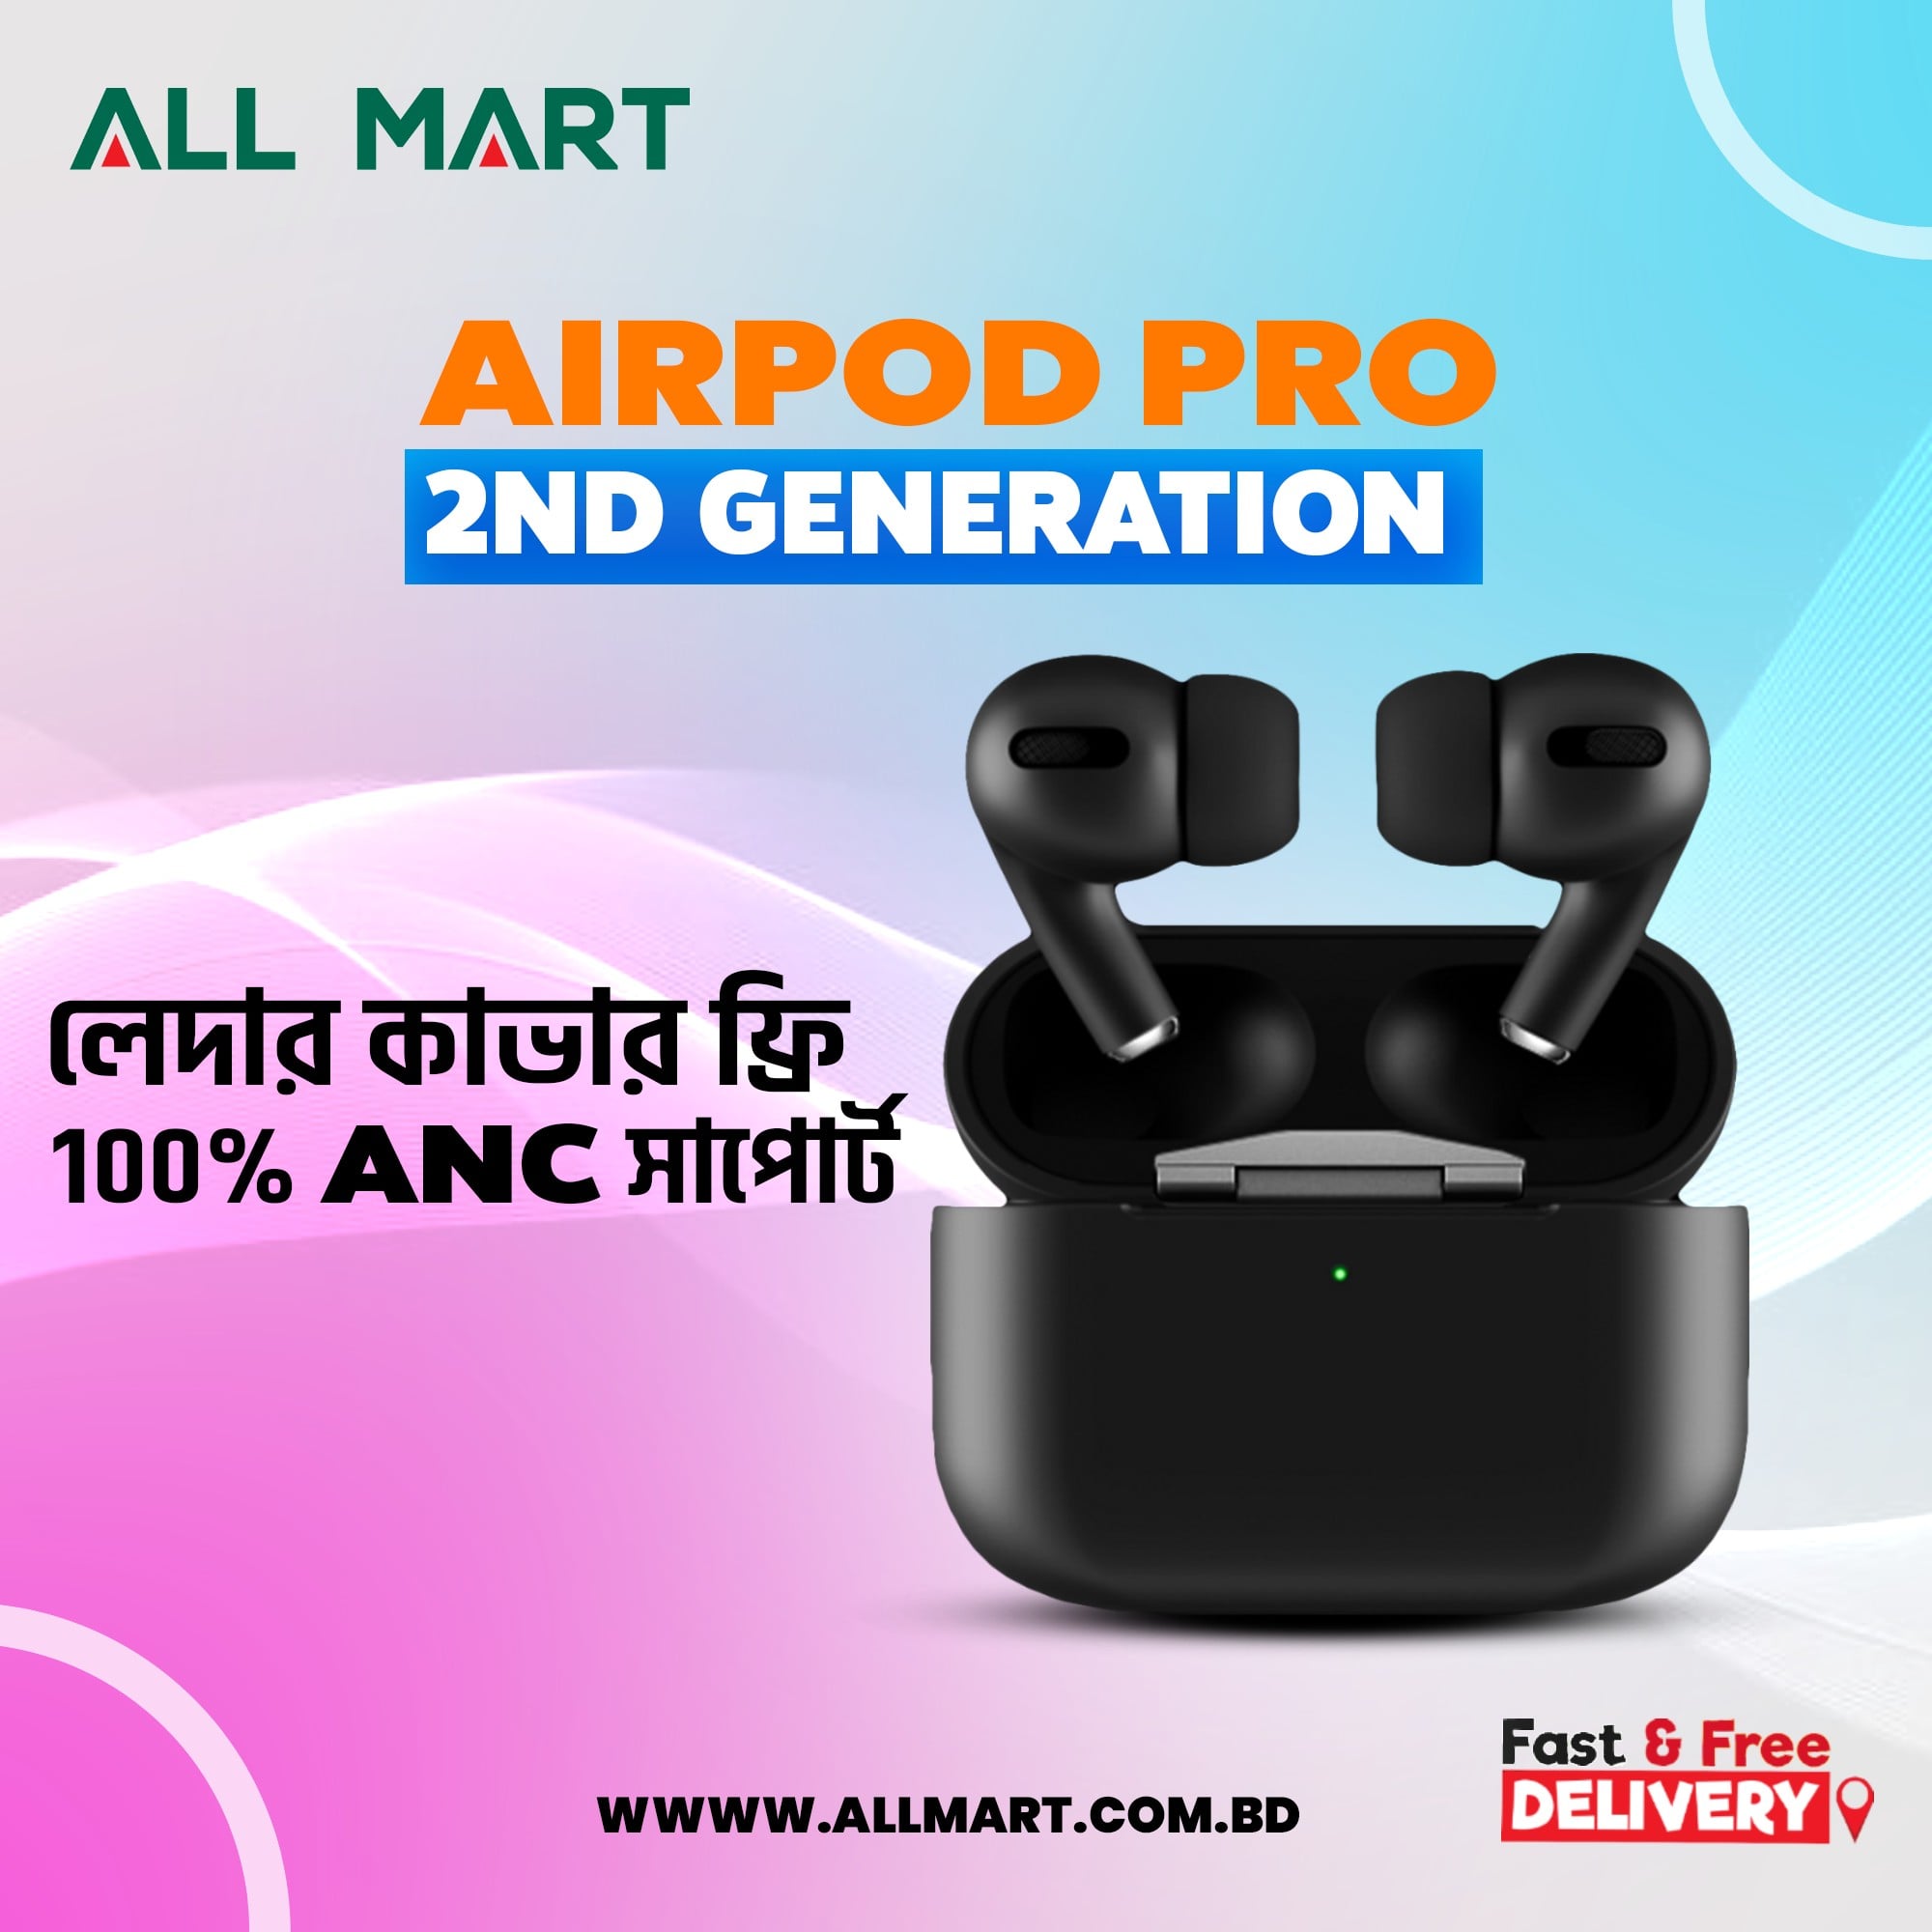 Airpods Pro 2nd Gen: Premium Master Copy with 2x ANC & Wireless Chargi